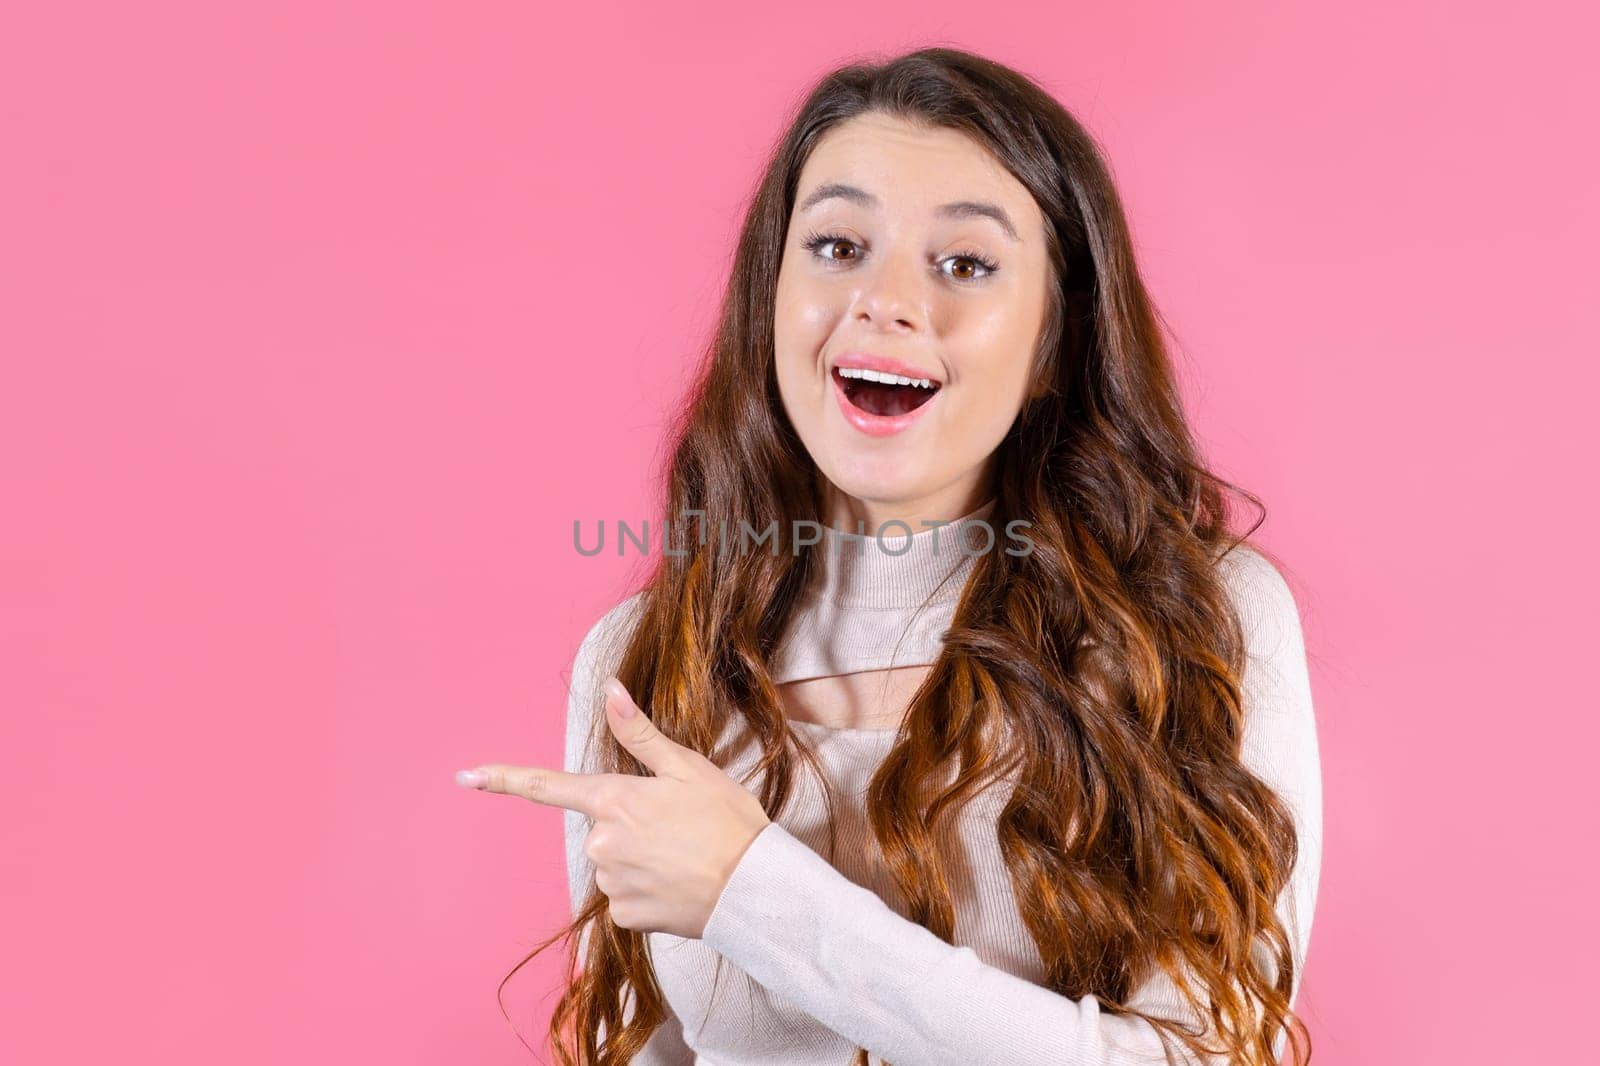 A portrait of a young student pointed by finger on copy space with pink background.